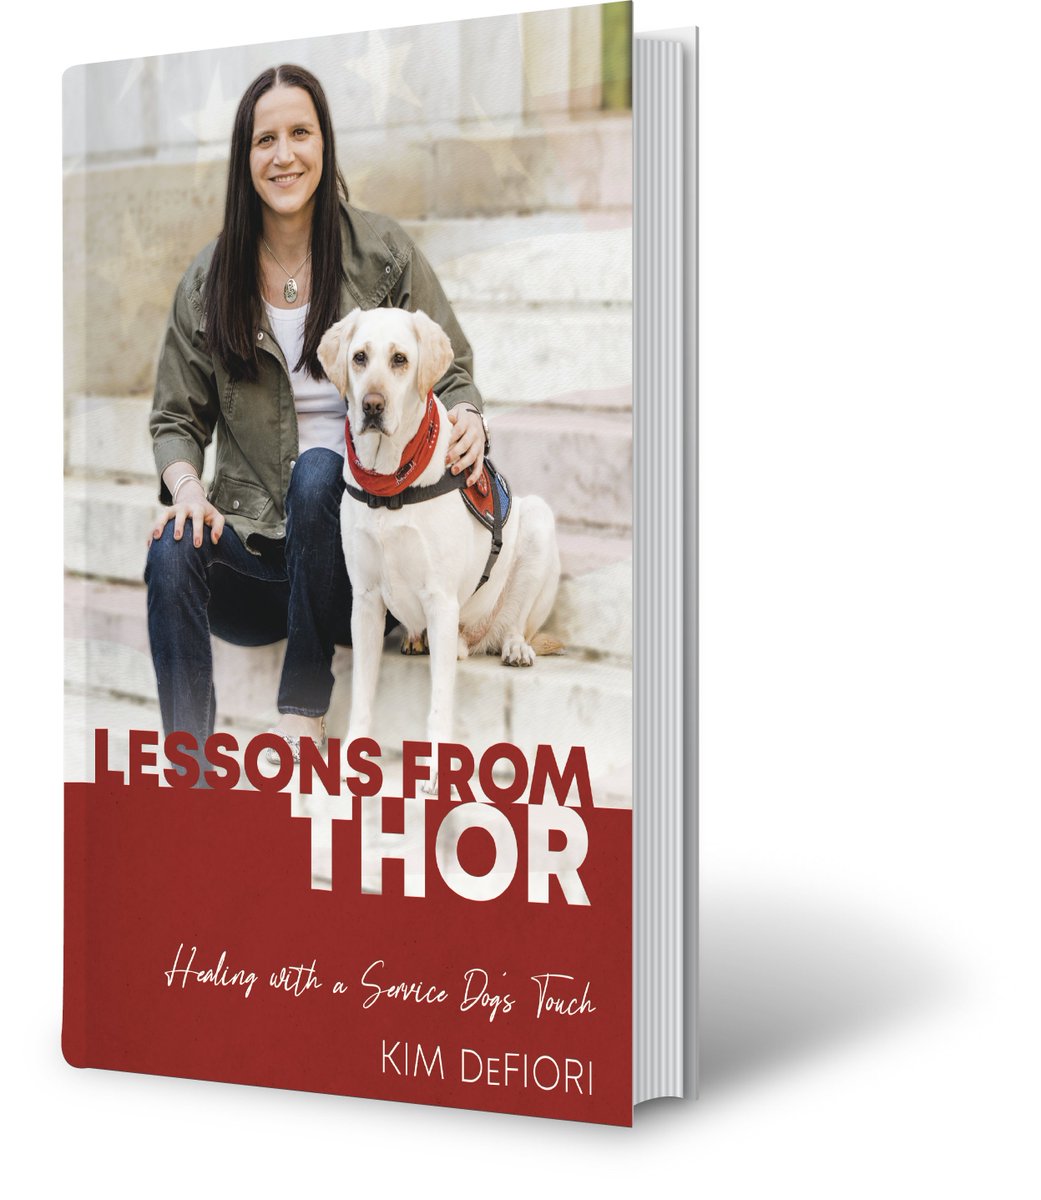 Meet author Kim DeFiori and get a signed copy of Lessons from Thor. Early birds will receive a free gift.
https://t.co/IYZu6v1b8u
#Party  #Book #Story #Event https://t.co/joLtmQ4Wku